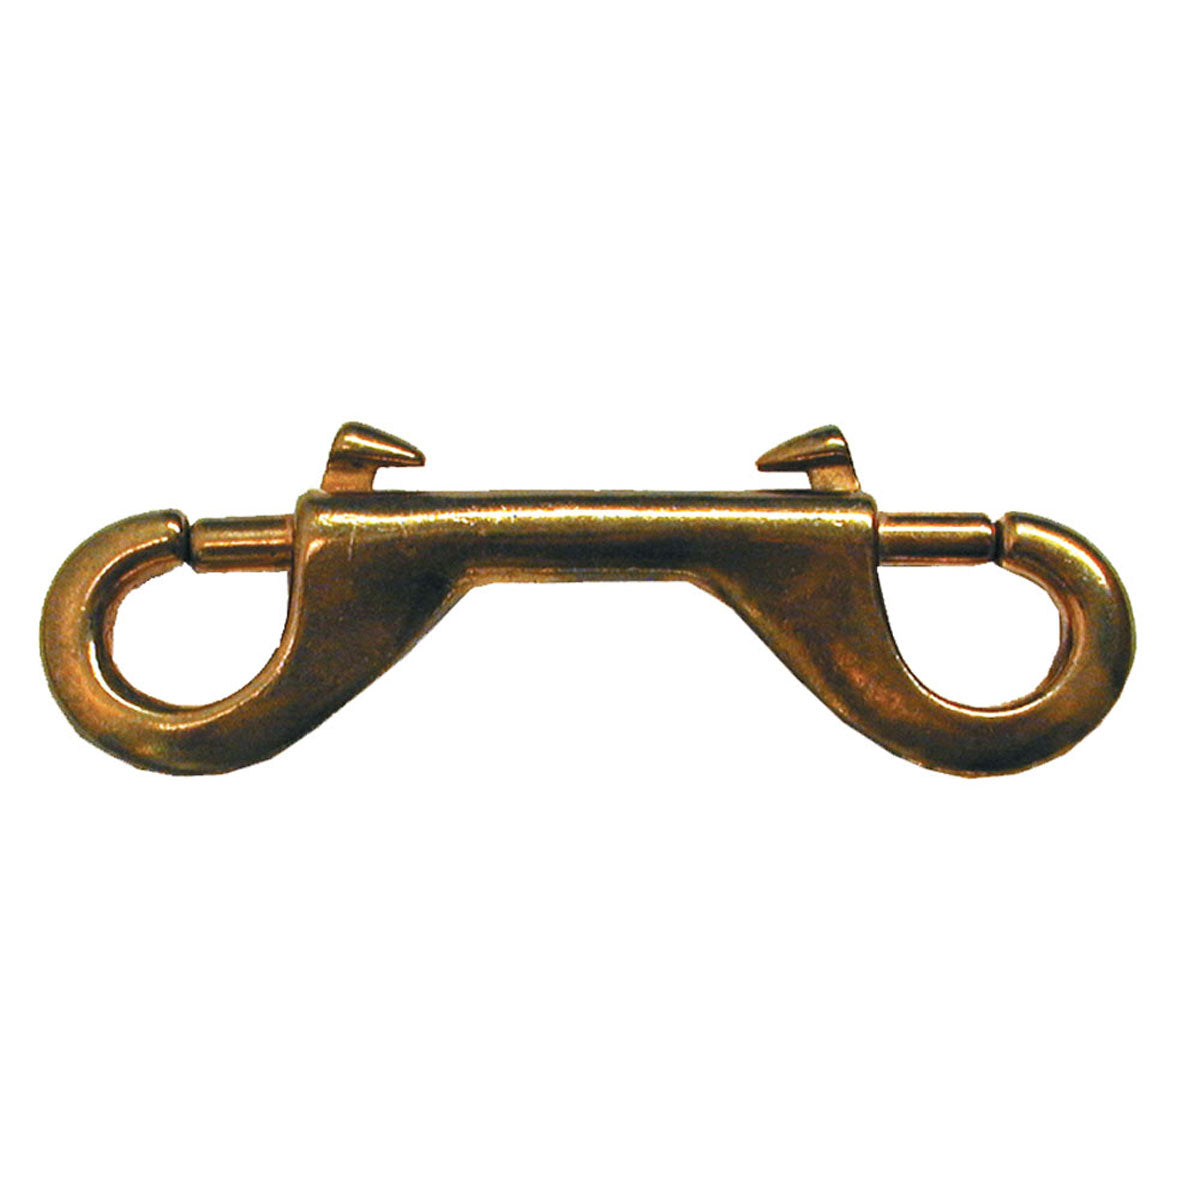 Solid Brass Double End Bolt Snap 4-3/4" - 4/Bag